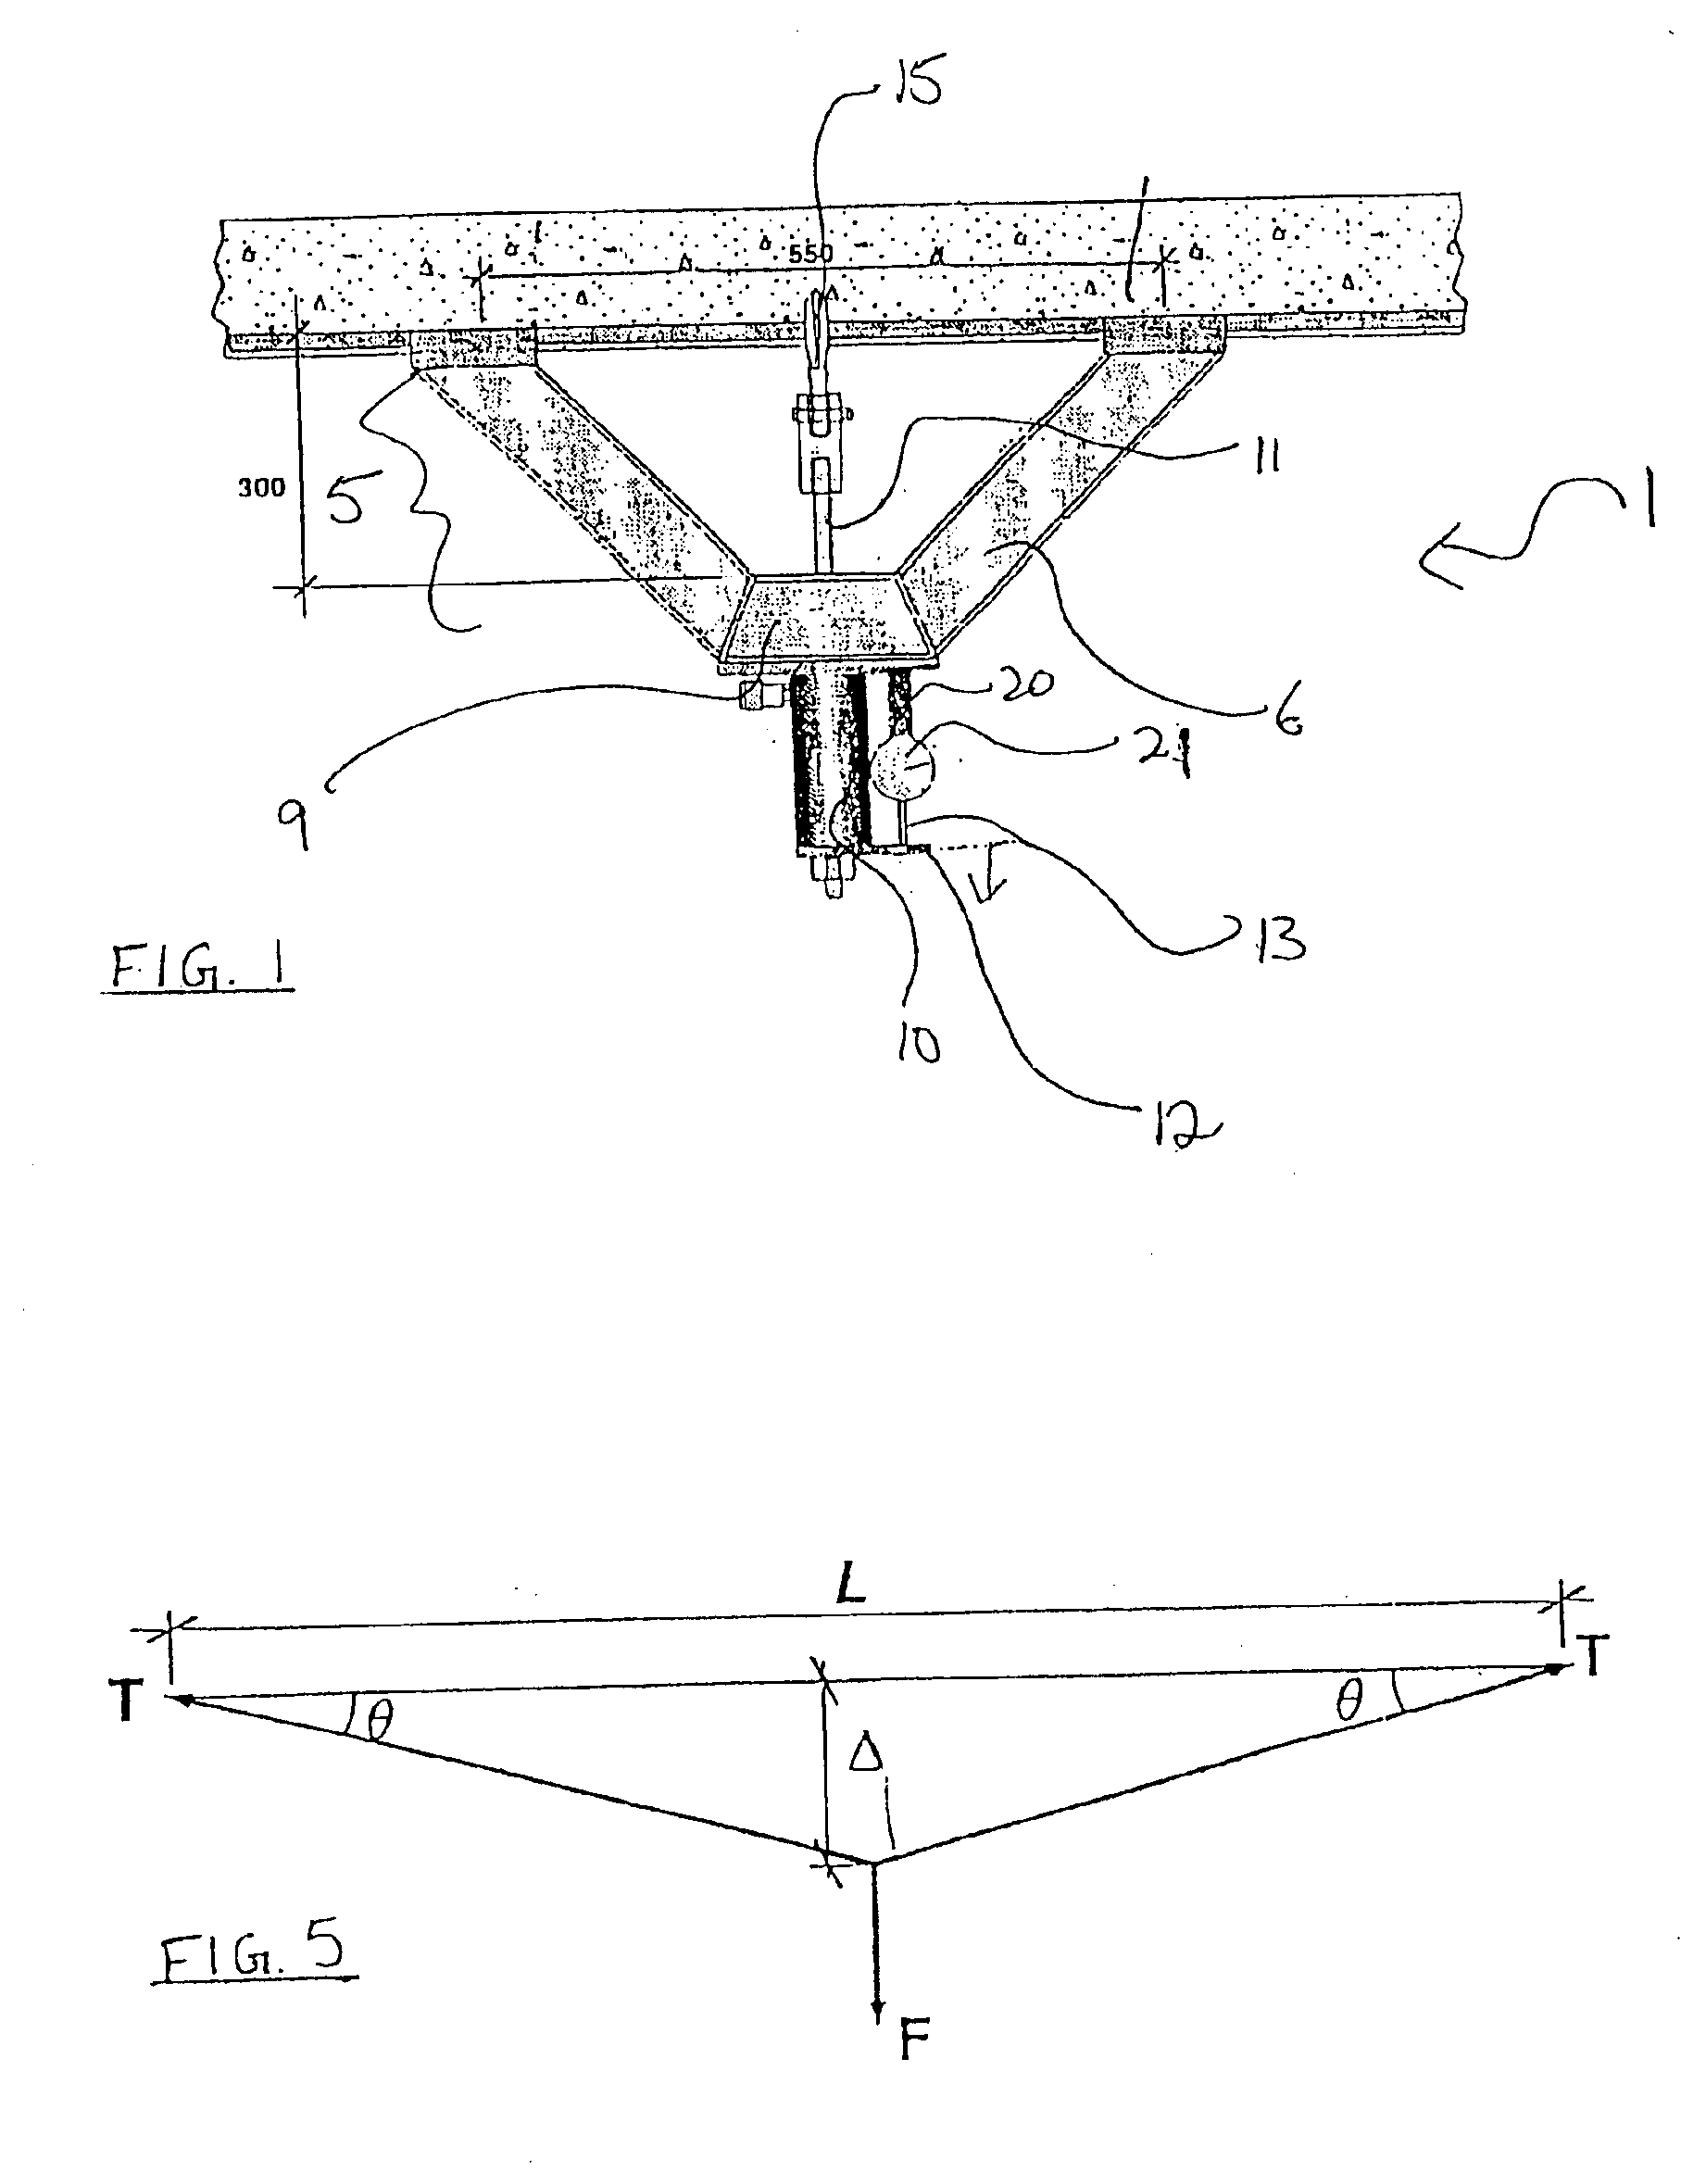 Device and method for testing the tension in stressed cables of concrete structure